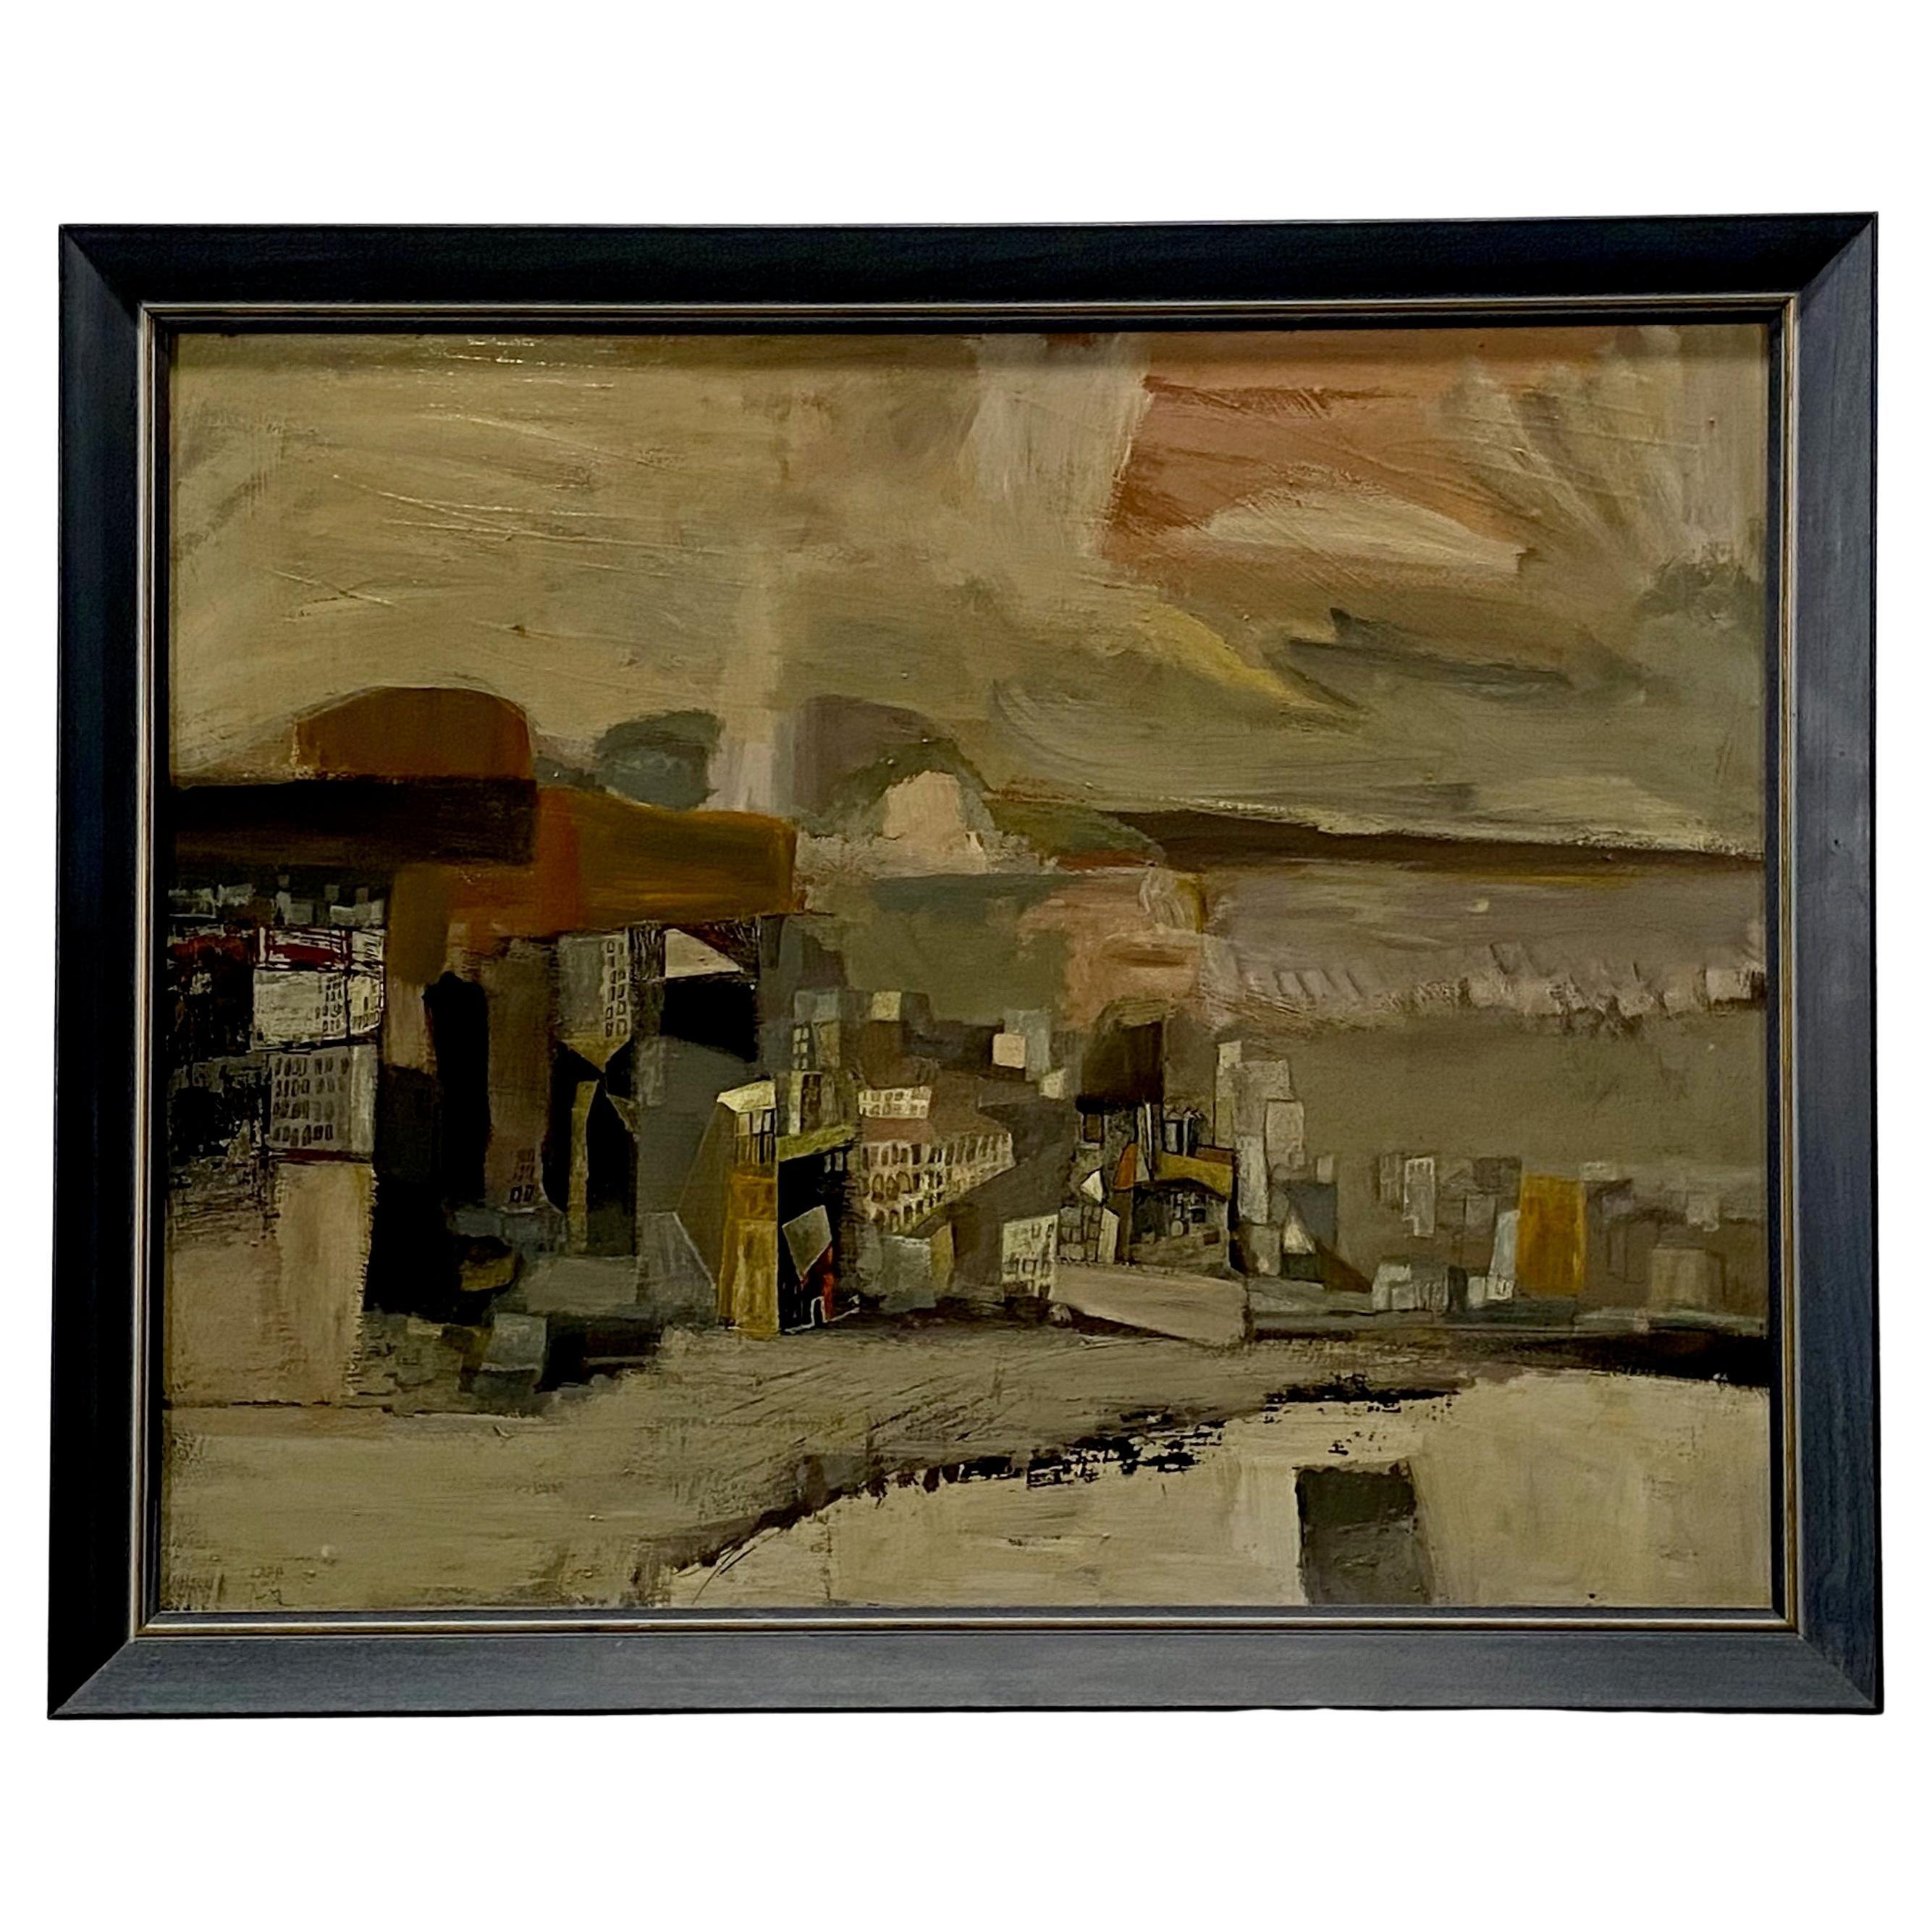 California Mid-Century Modernist Abstract Cityscape Painting by Maurice Lapp